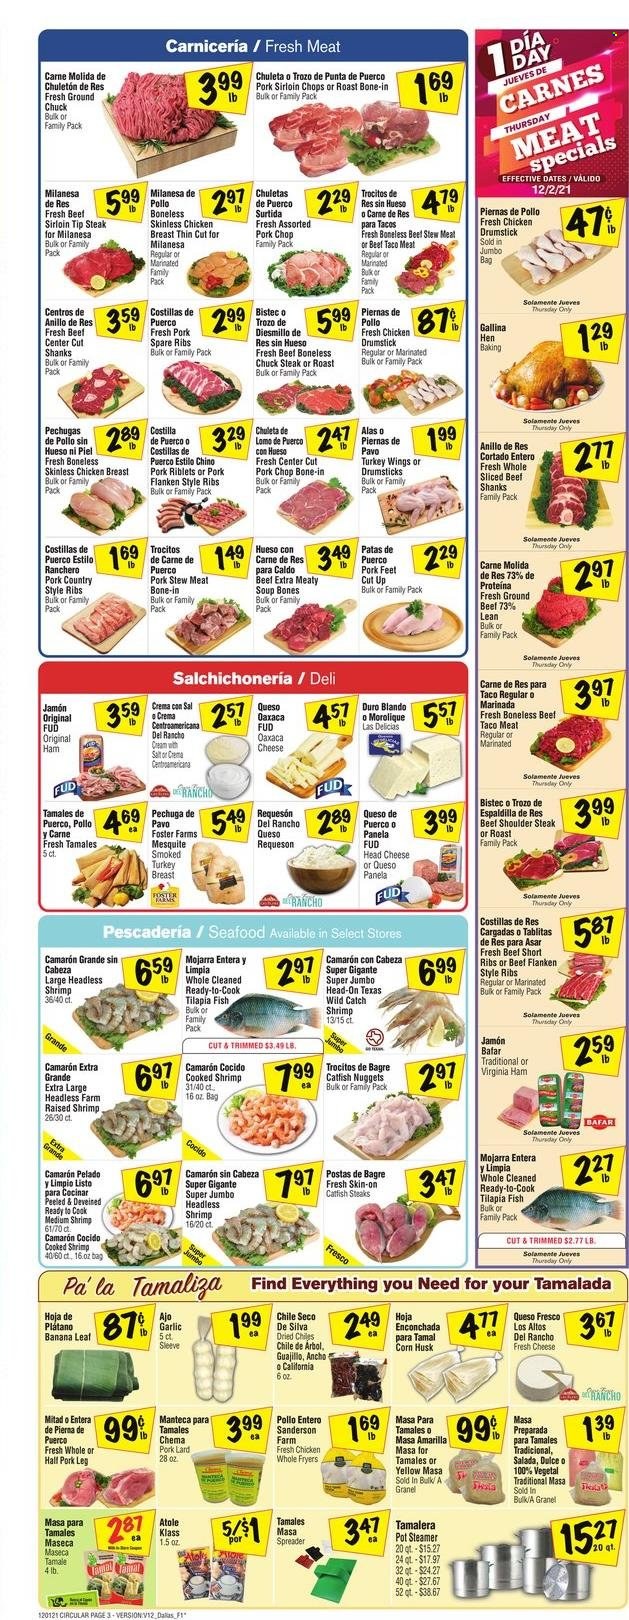 thumbnail - Fiesta Mart Flyer - 12/01/2021 - 12/07/2021 - Sales products - stew meat, corn, garlic, catfish, tilapia, seafood, fish, shrimps, catfish nuggets, soup, ham, virginia ham, queso fresco, lard, hoja enconchada, turkey breast, whole chicken, chicken breasts, turkey wings, beef meat, beef ribs, beef sirloin, ground beef, ground chuck, steak, chuck steak, pork chops, pork loin, pork meat, pork ribs, pork spare ribs, pork leg, country style ribs, bag, spreader. Page 3.